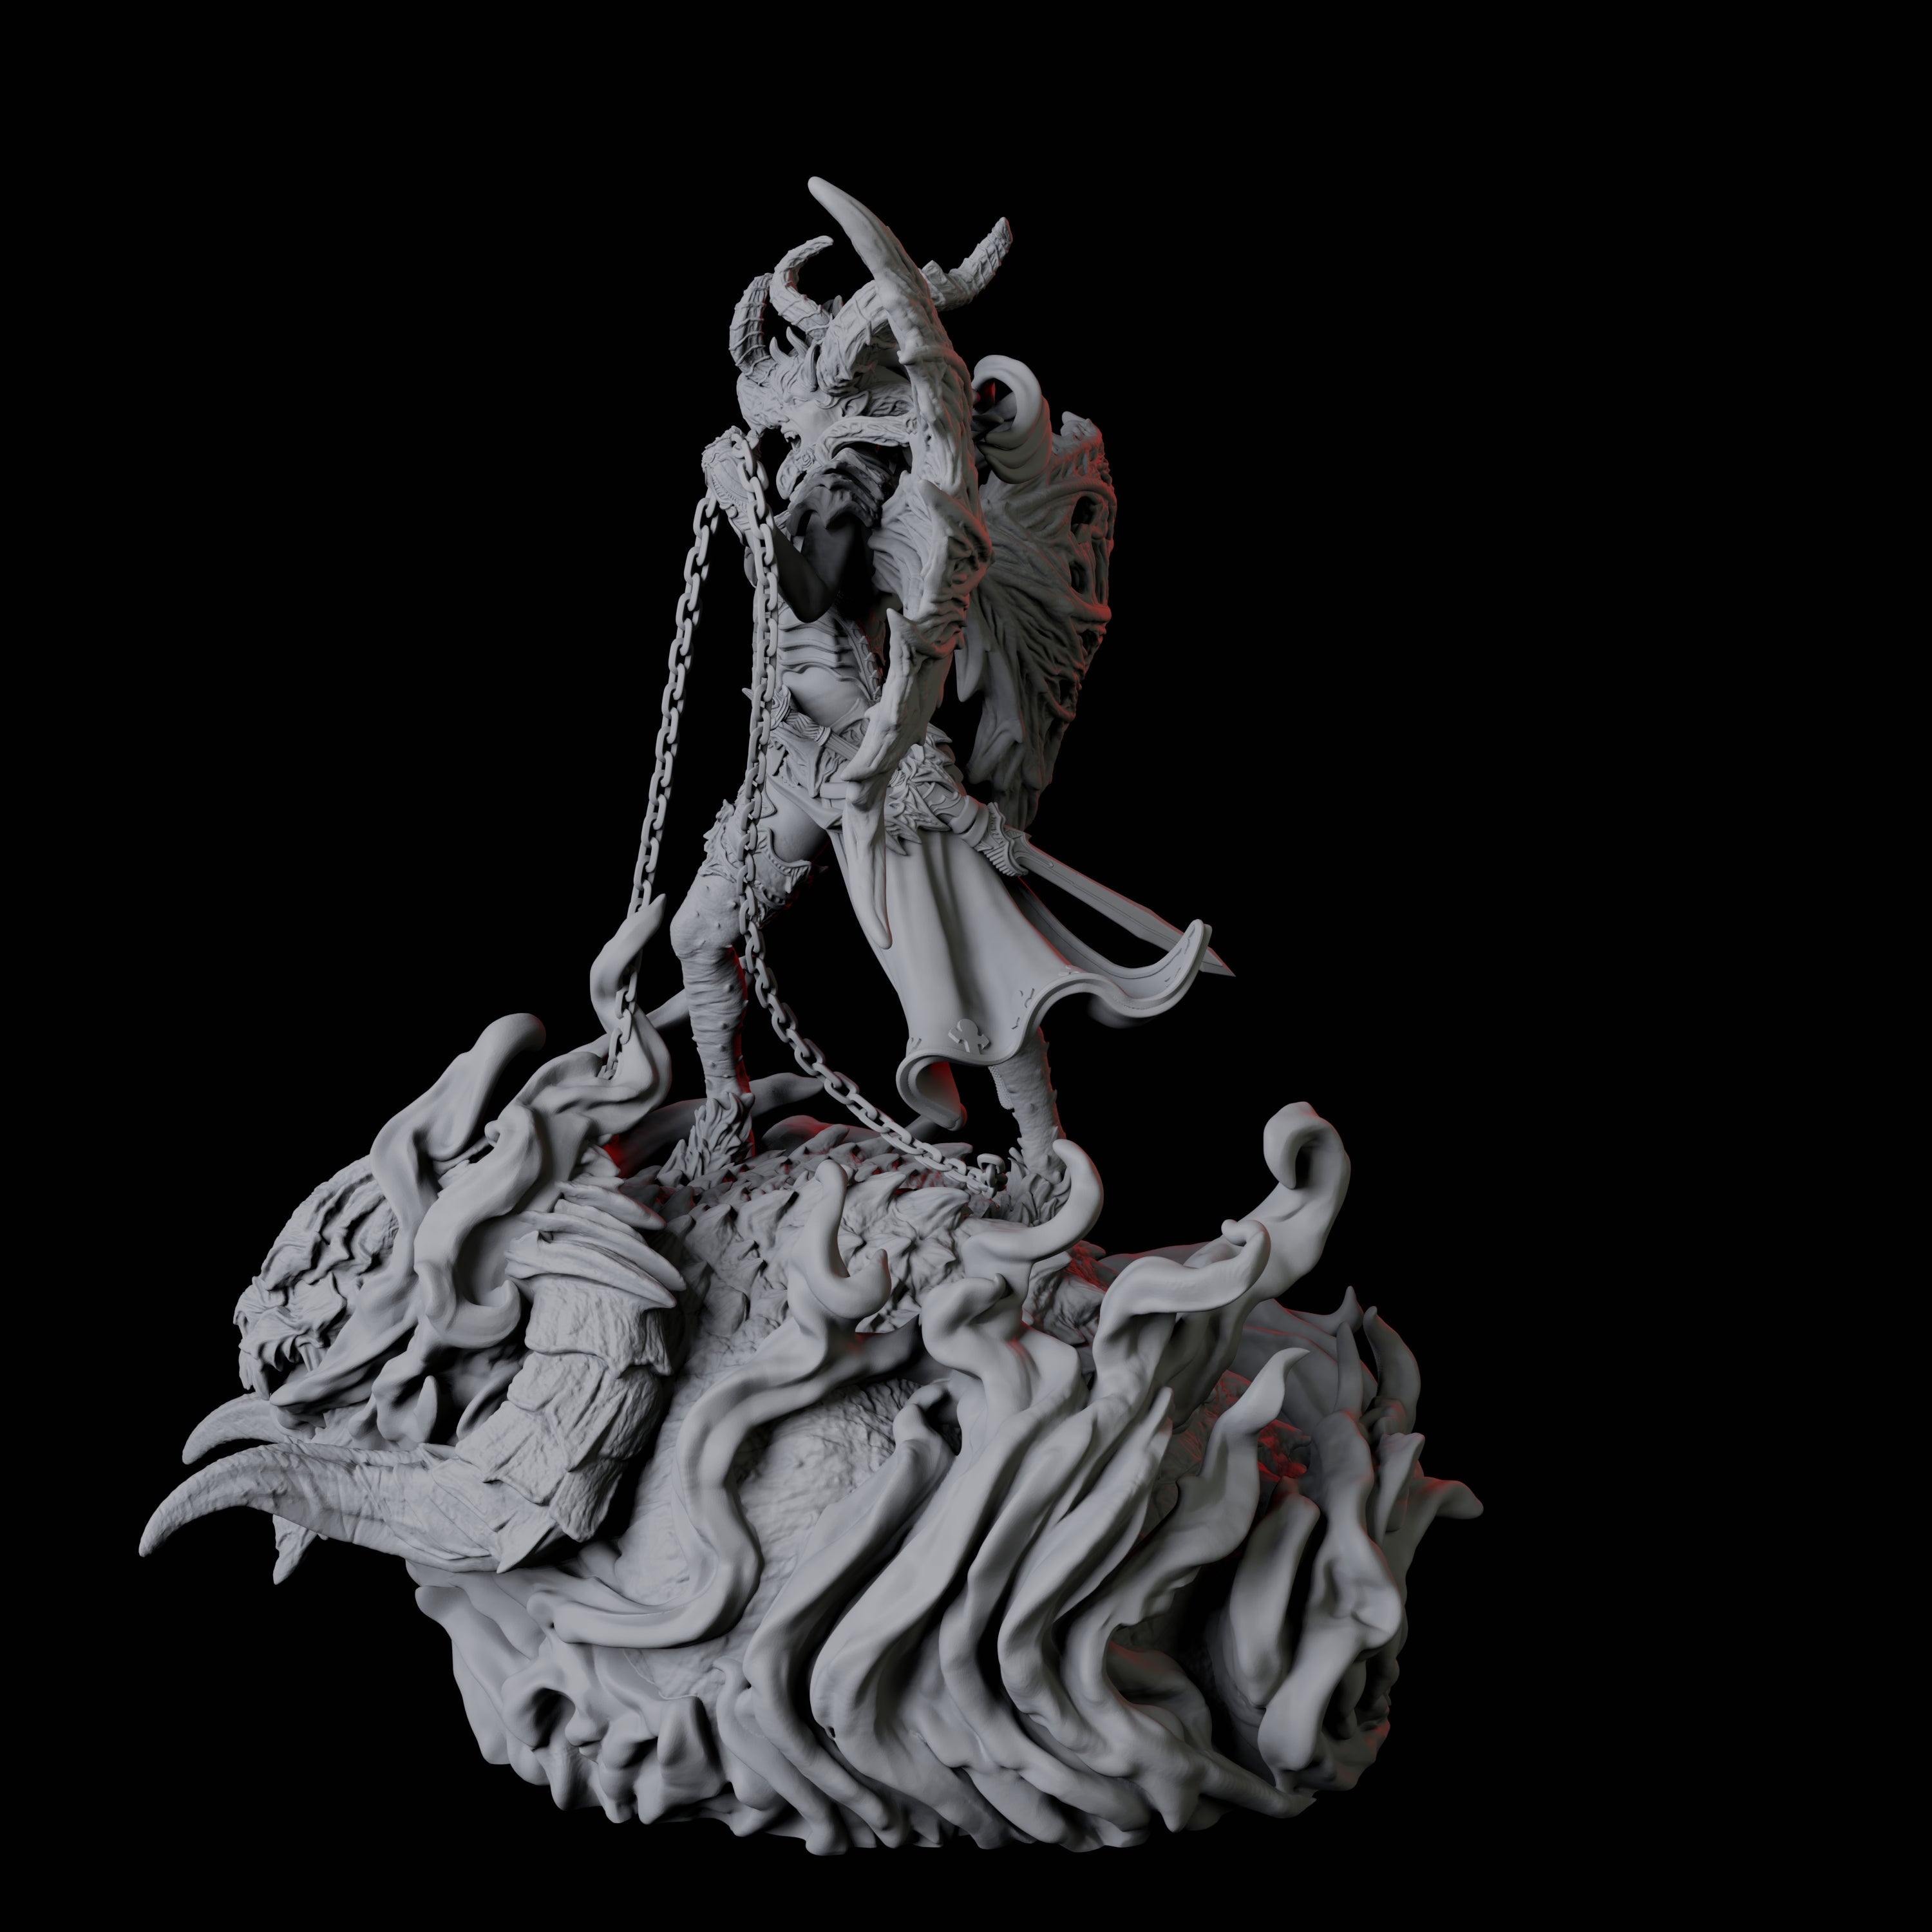 Eiseth, Hell's Valkyrie and Erinyes Queen Miniature for Dungeons and Dragons, Pathfinder or other TTRPGs